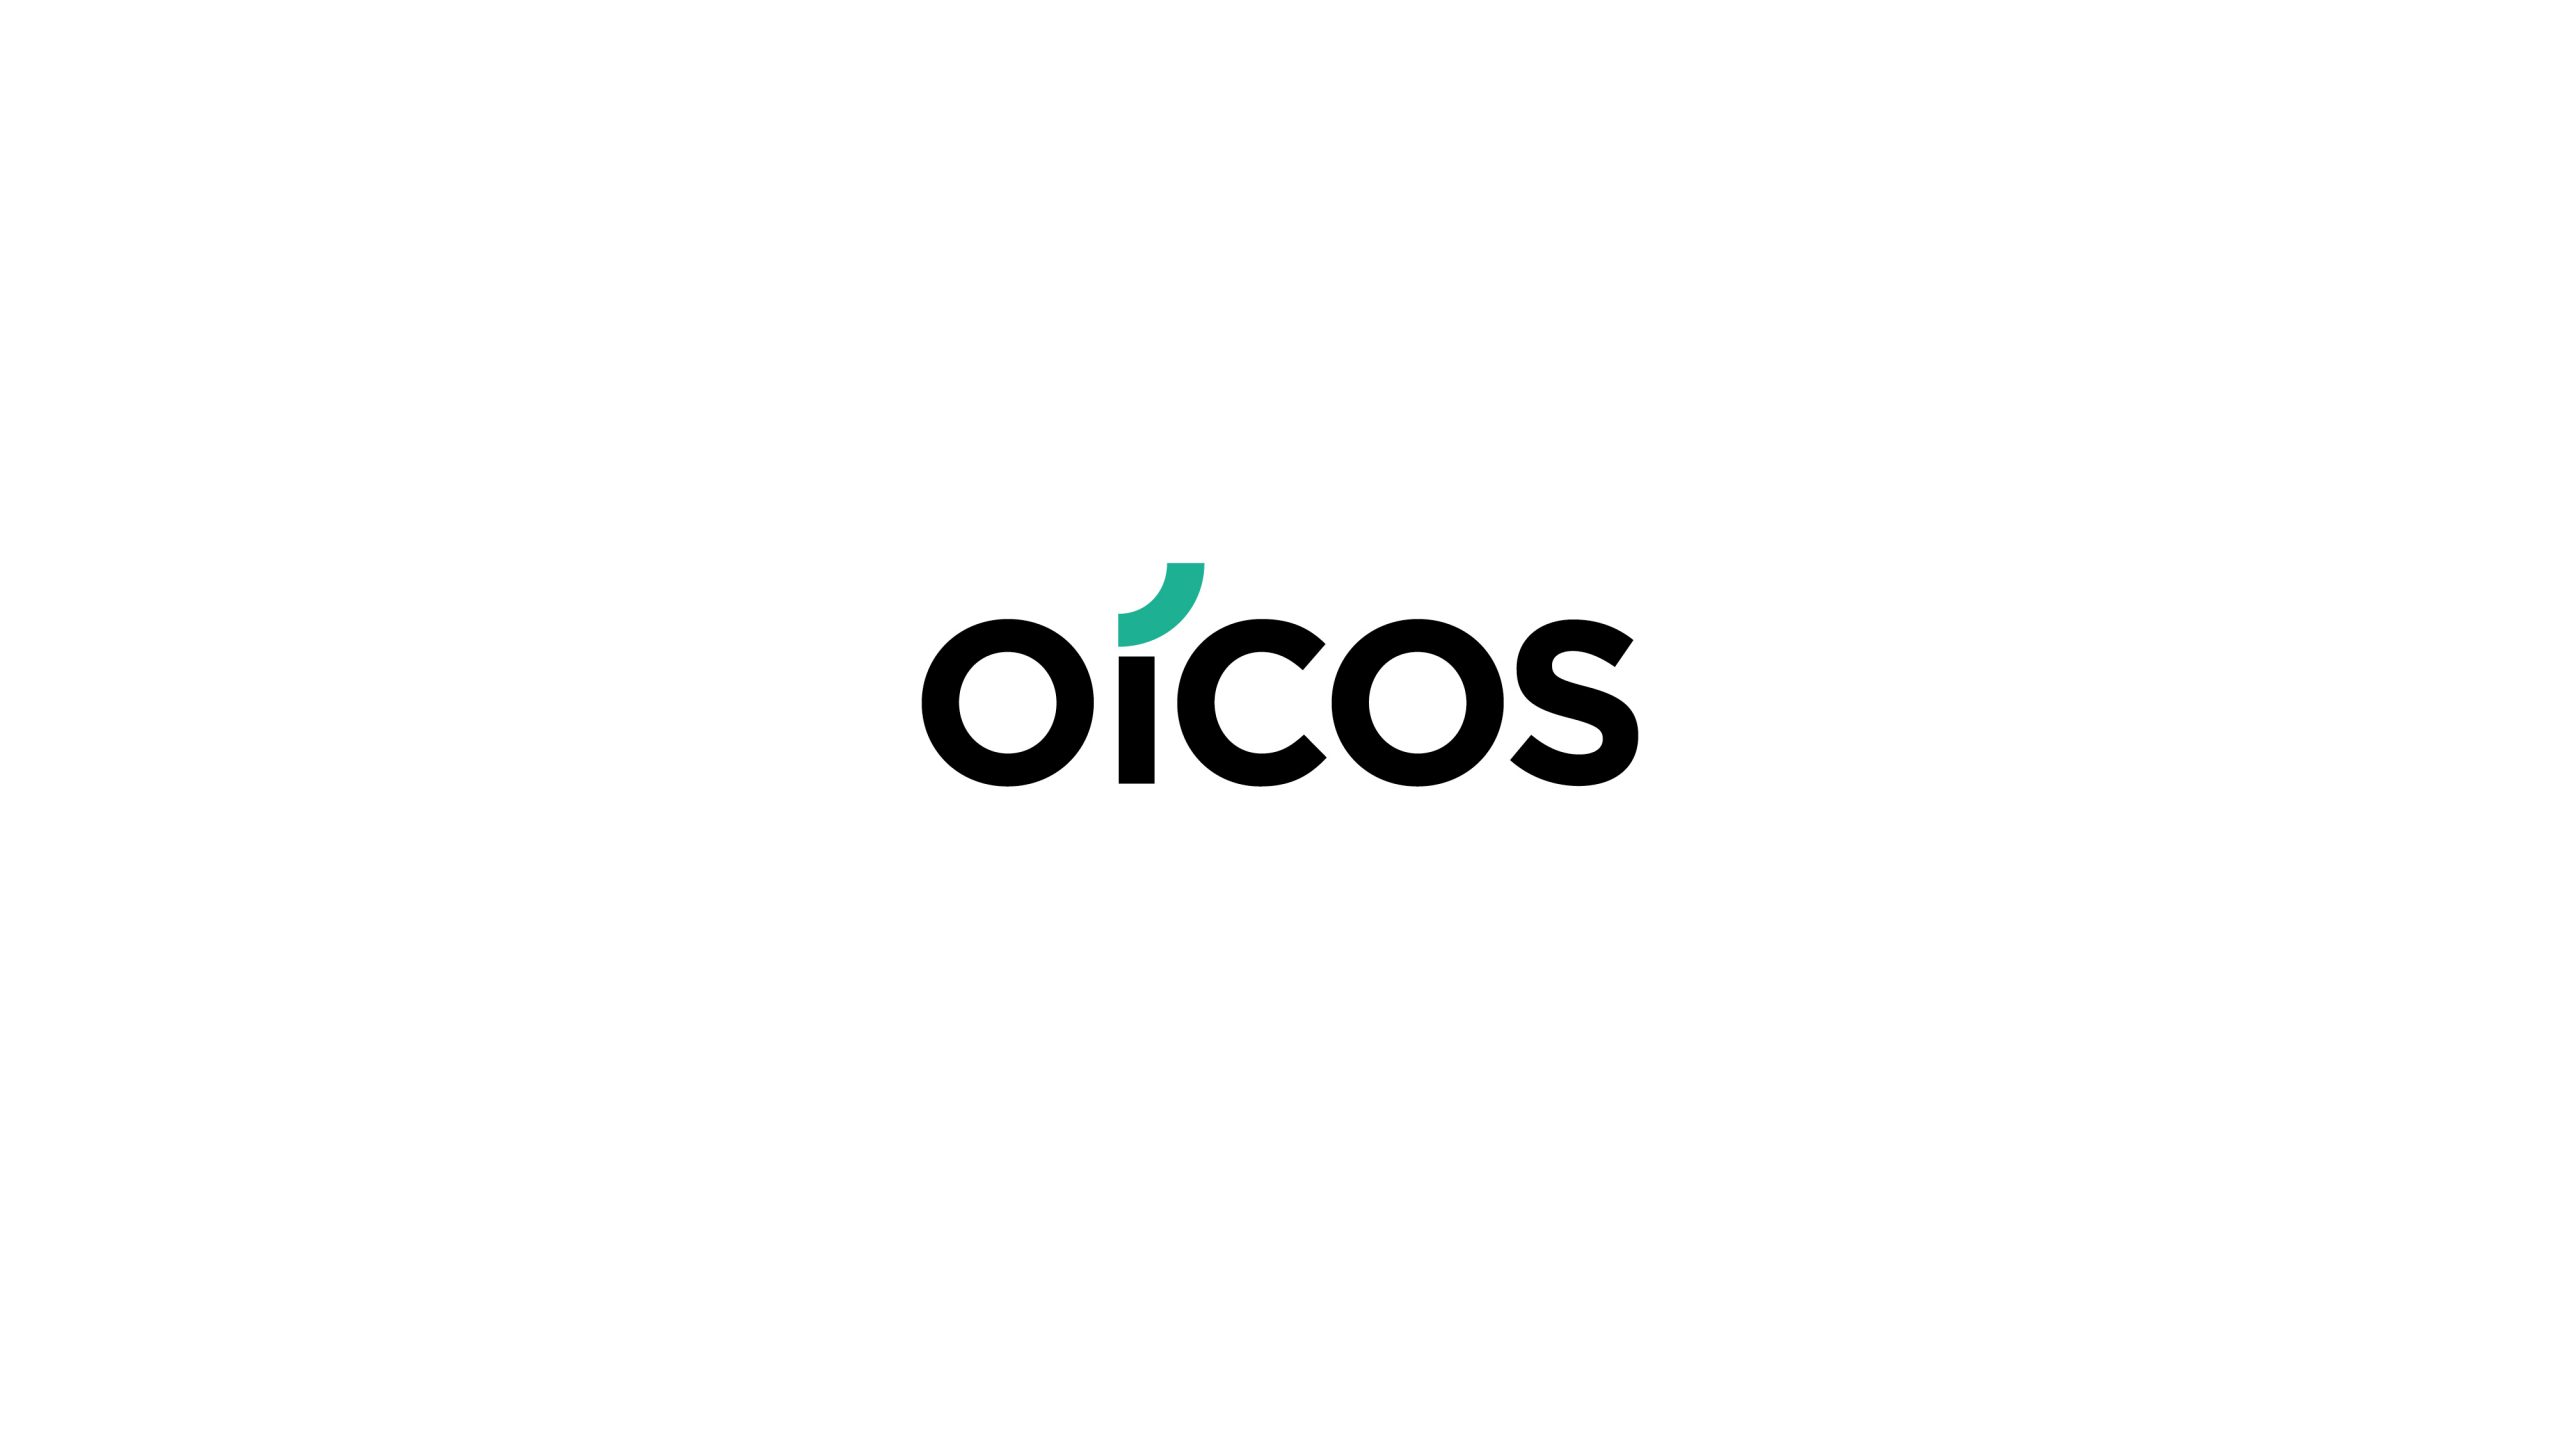 VISEE_Oicos_1-2